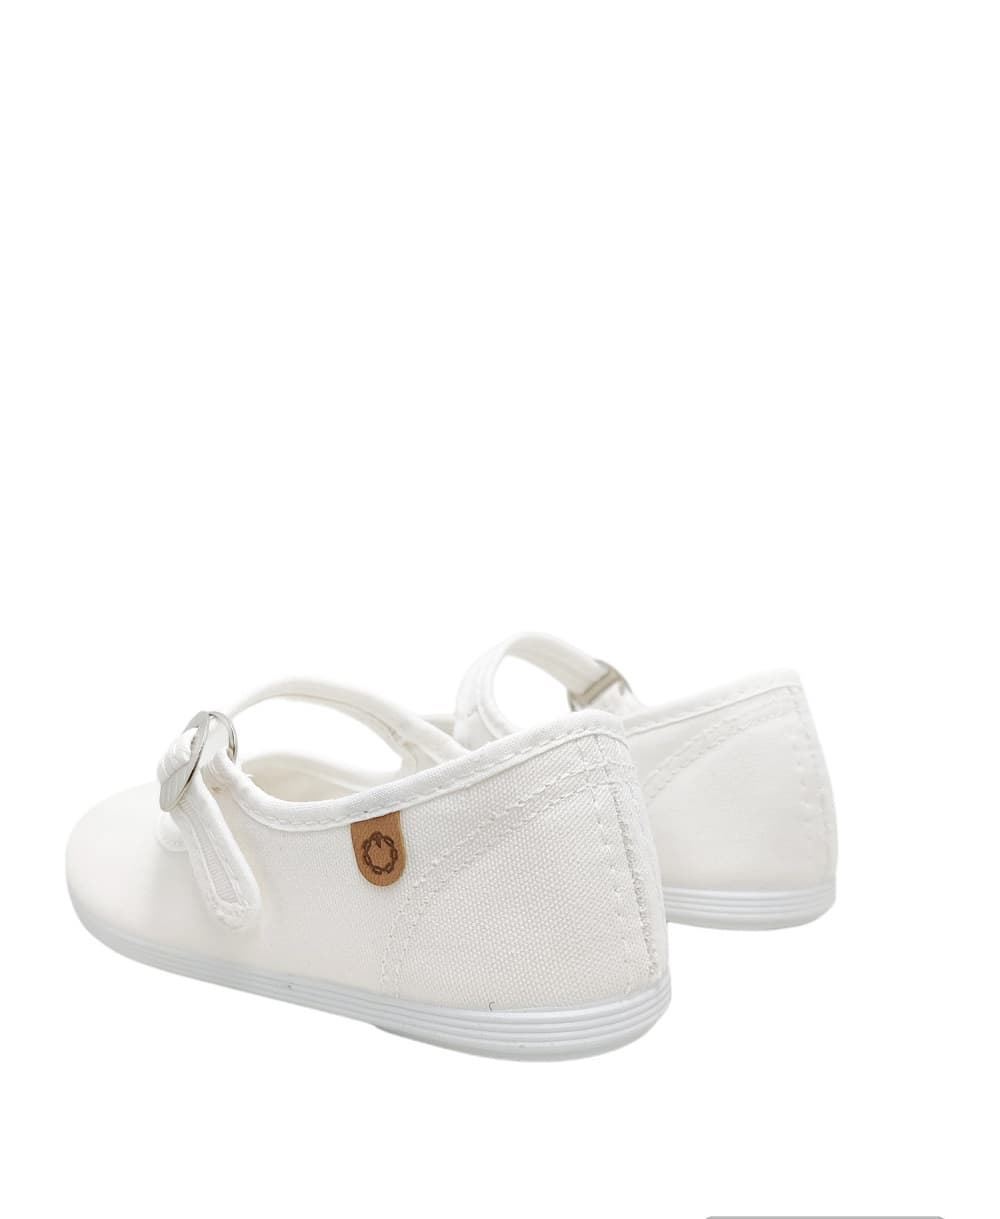 The Merceditas Chain for girls White Canvas - Image 3